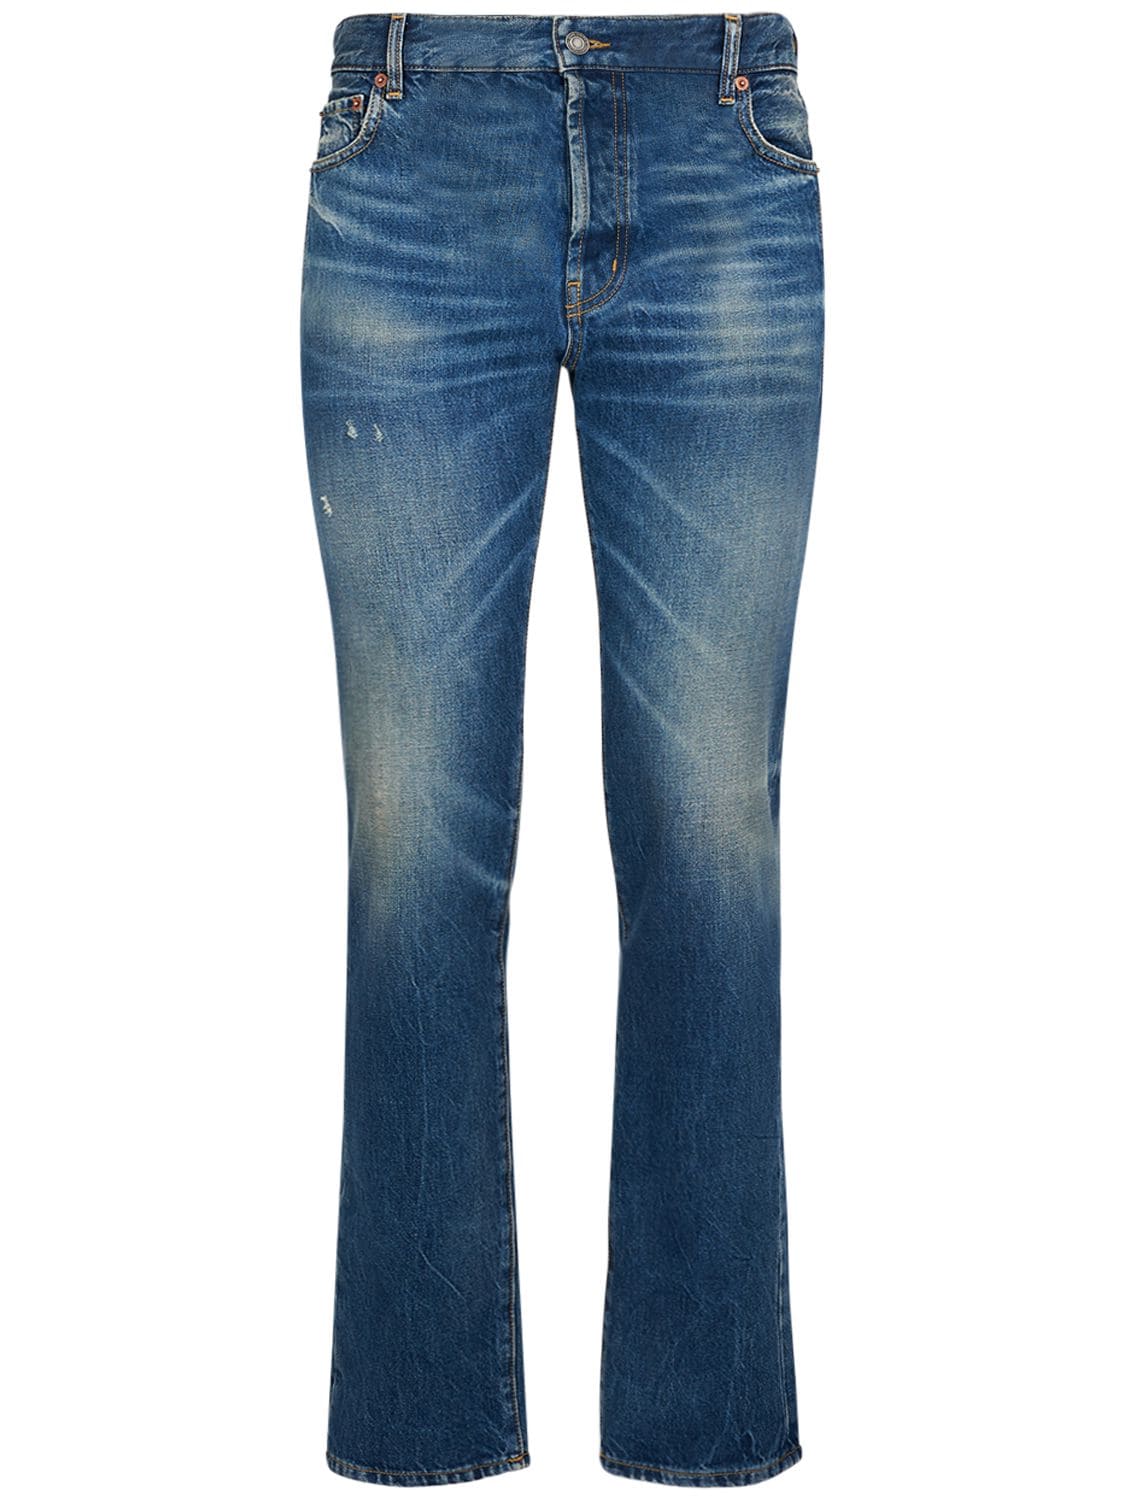 Relaxed Straight Cotton Denim Jeans – MEN > CLOTHING > JEANS